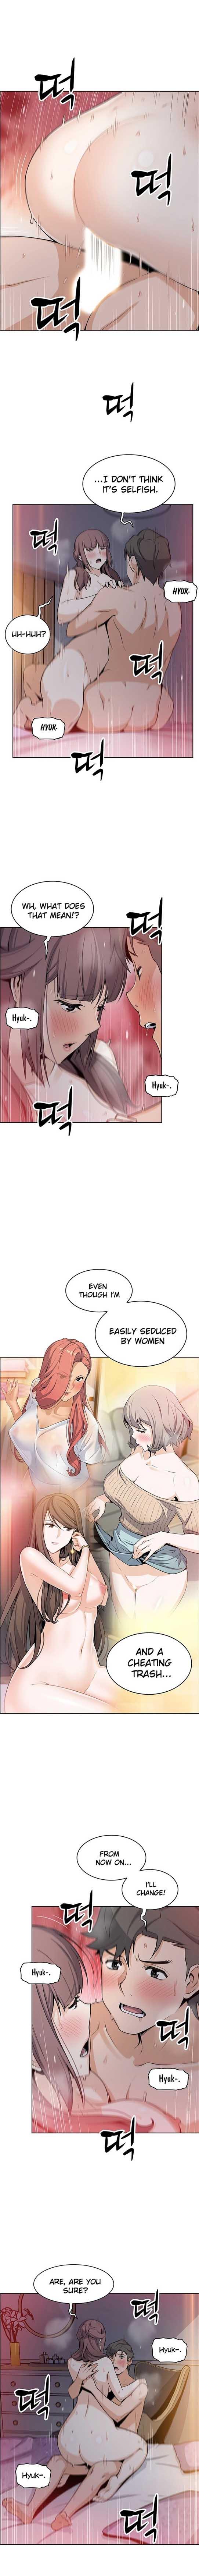 Housekeeper [Neck Pillow, Paper] Ch.49/49 [English] [Manhwa PDF] Completed 269